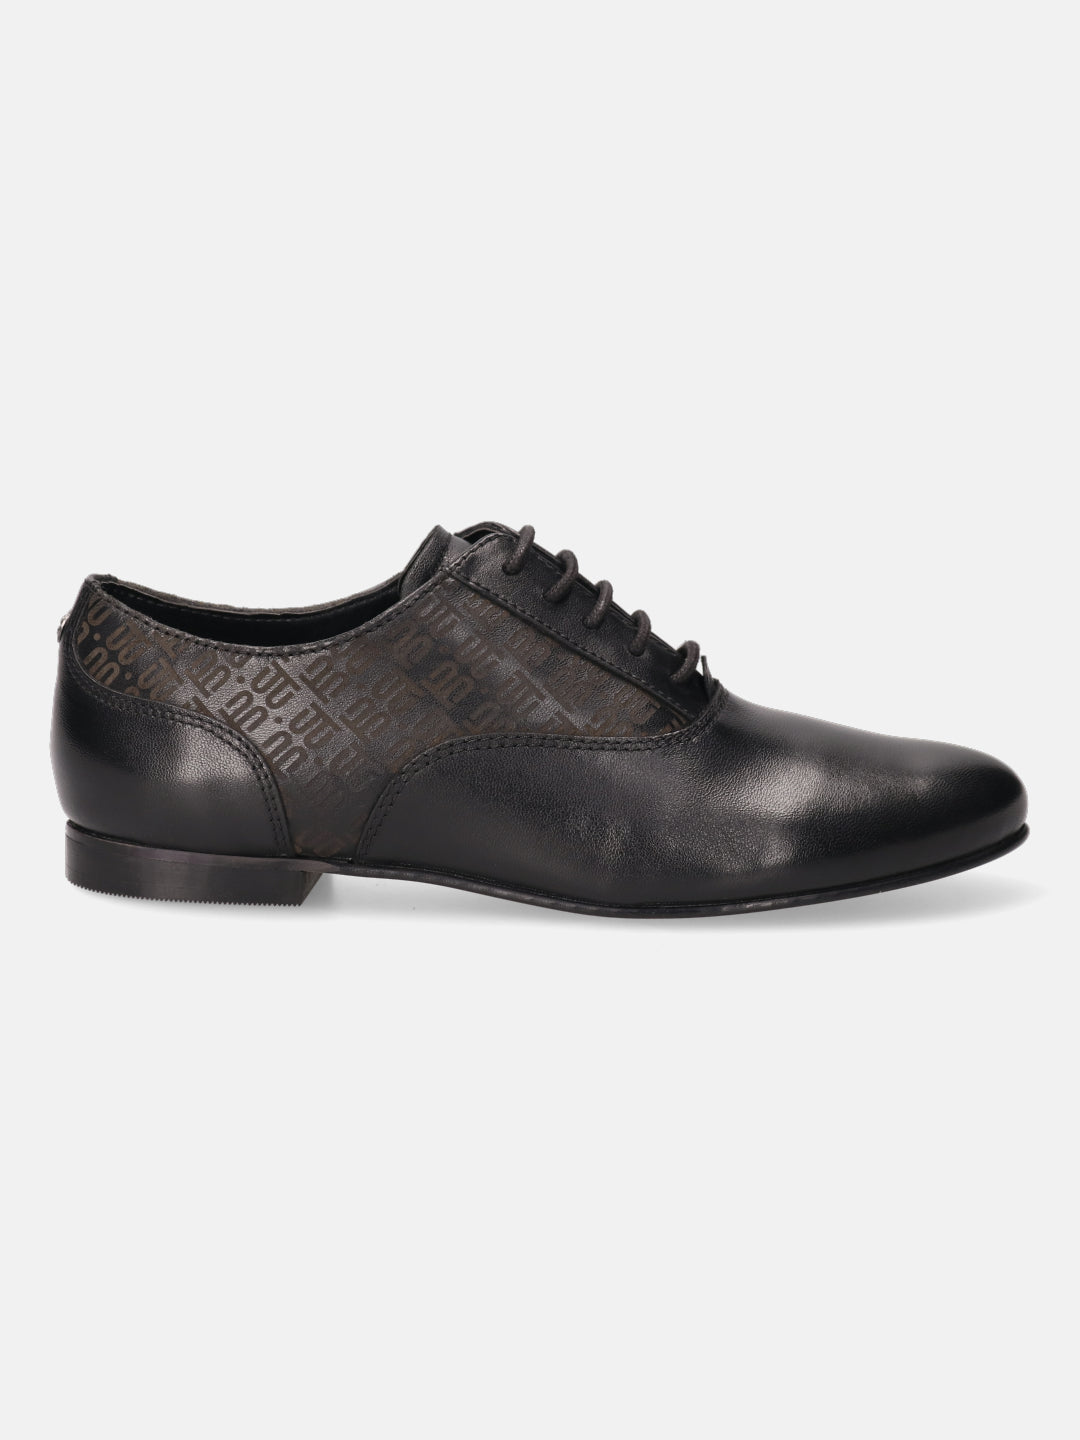 Anamica Black Leather Sneakers